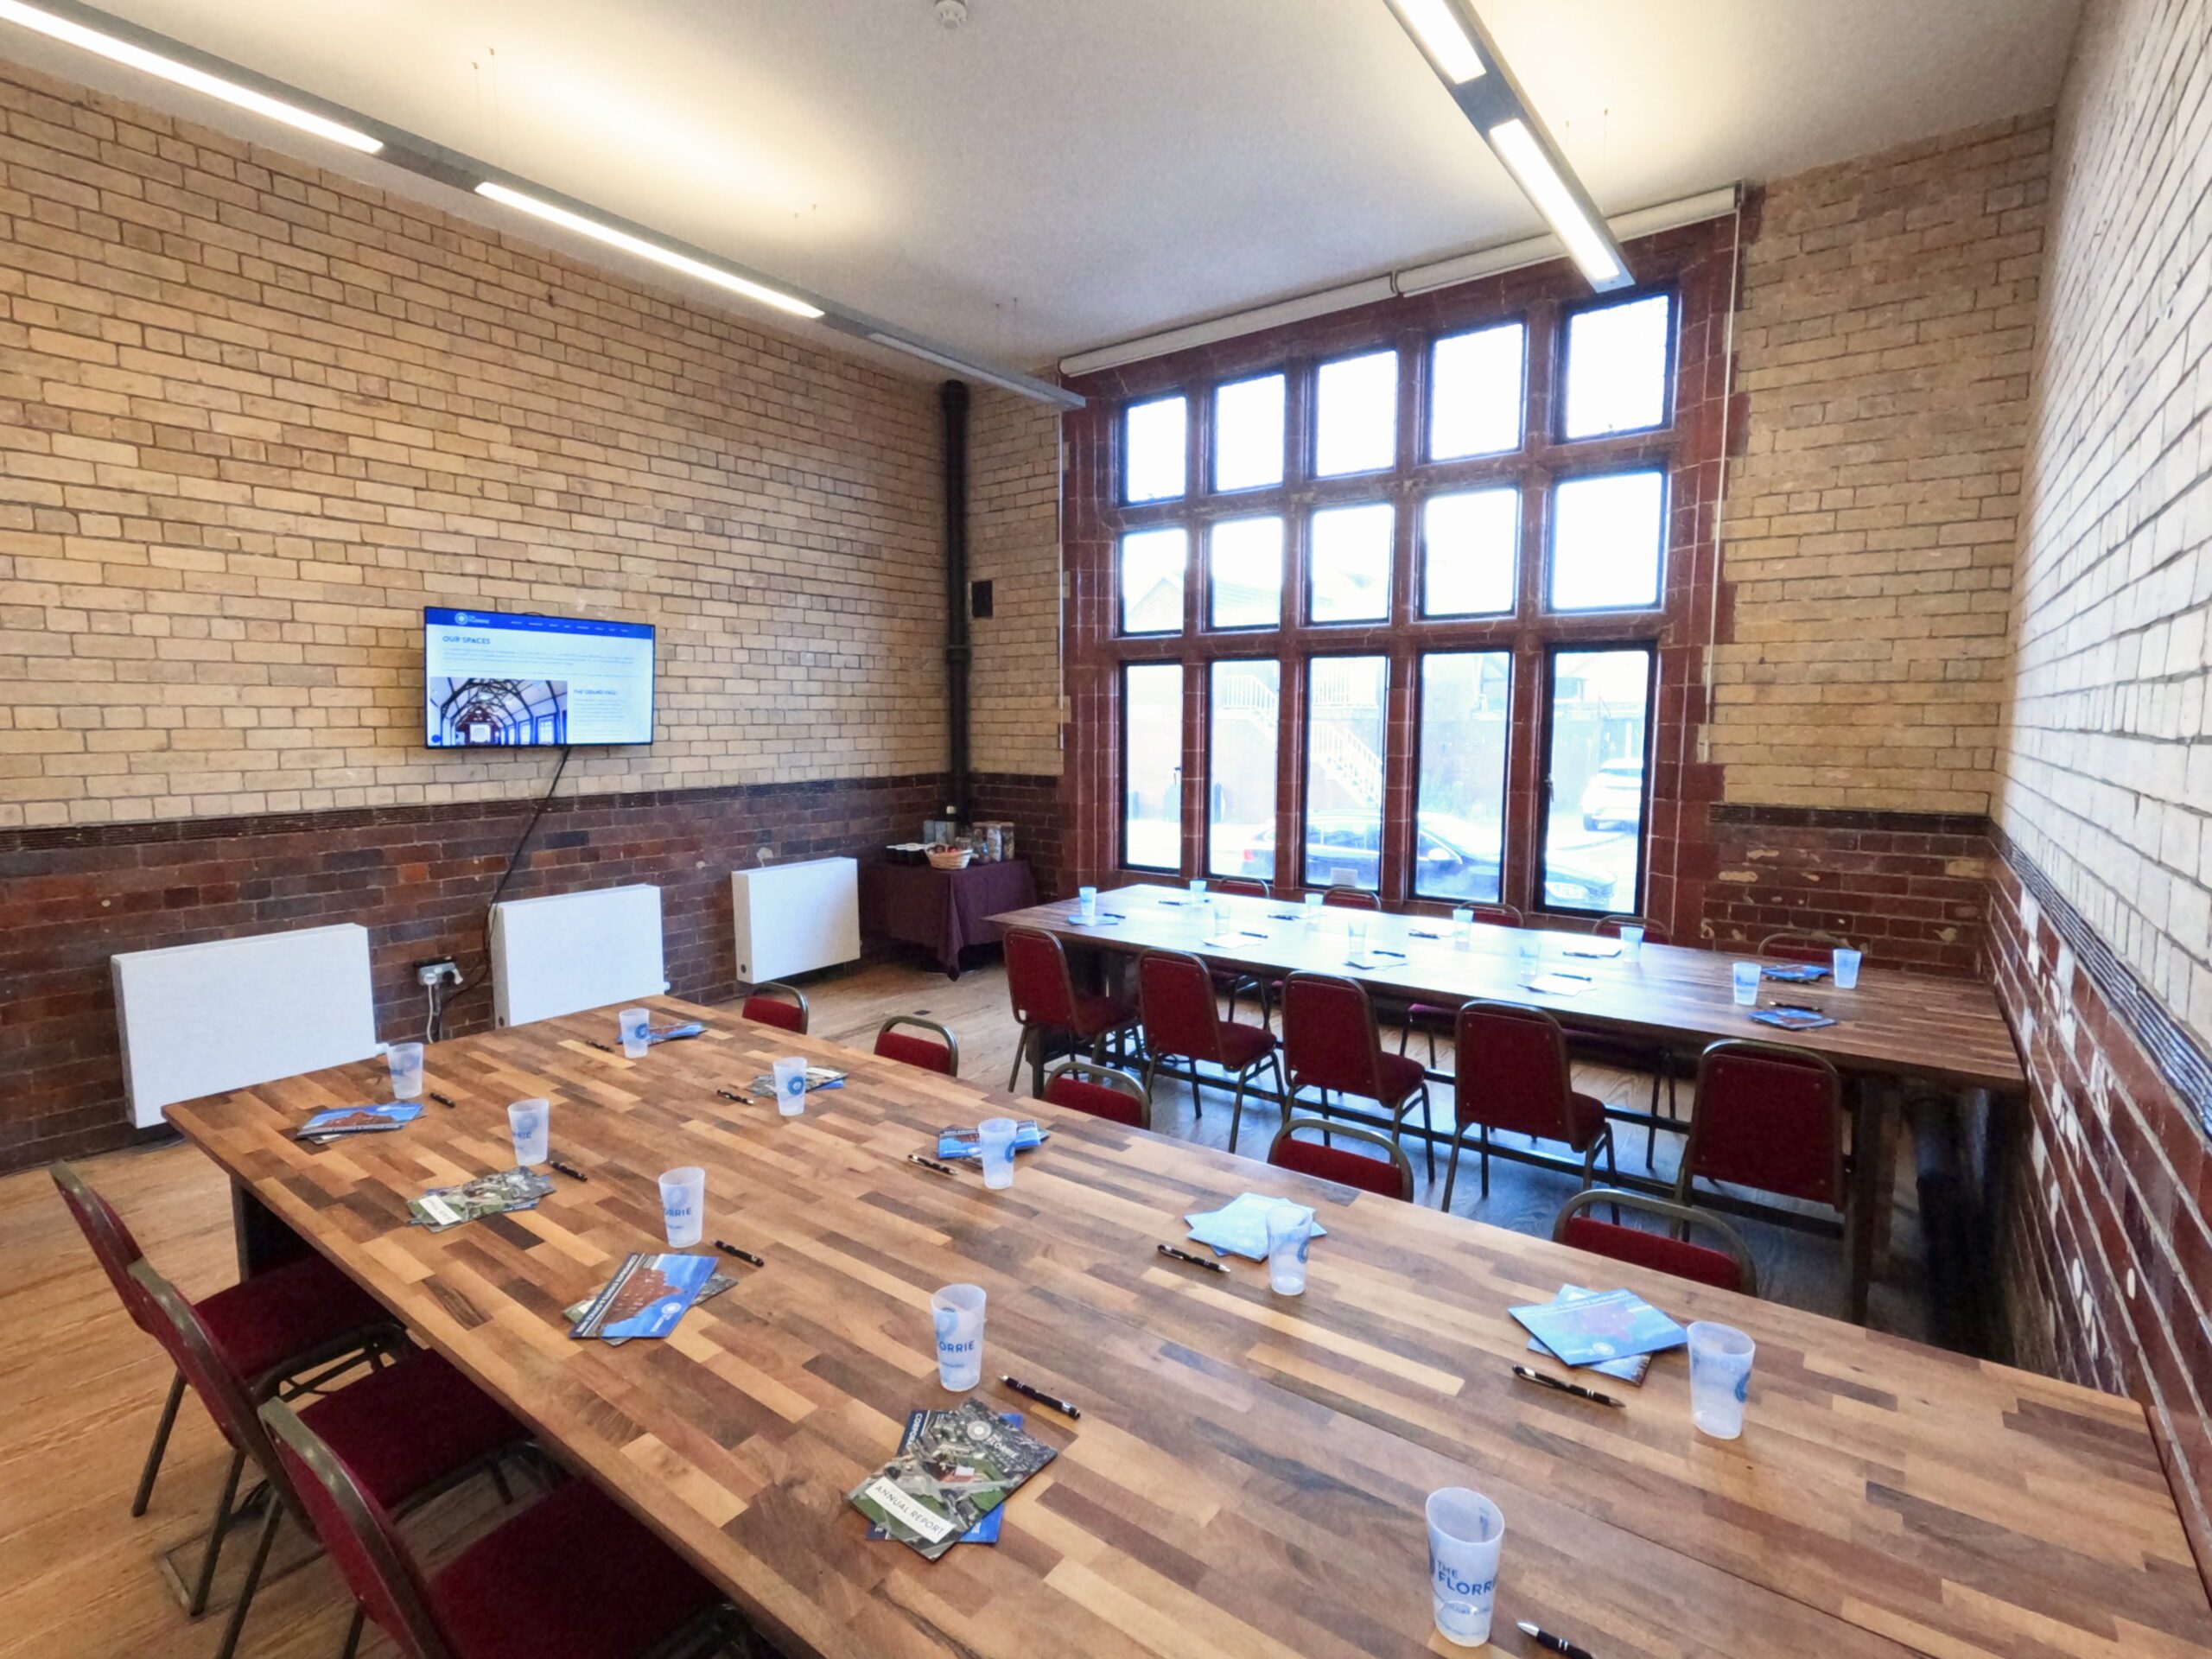 The Training Room event space at The Florrie.